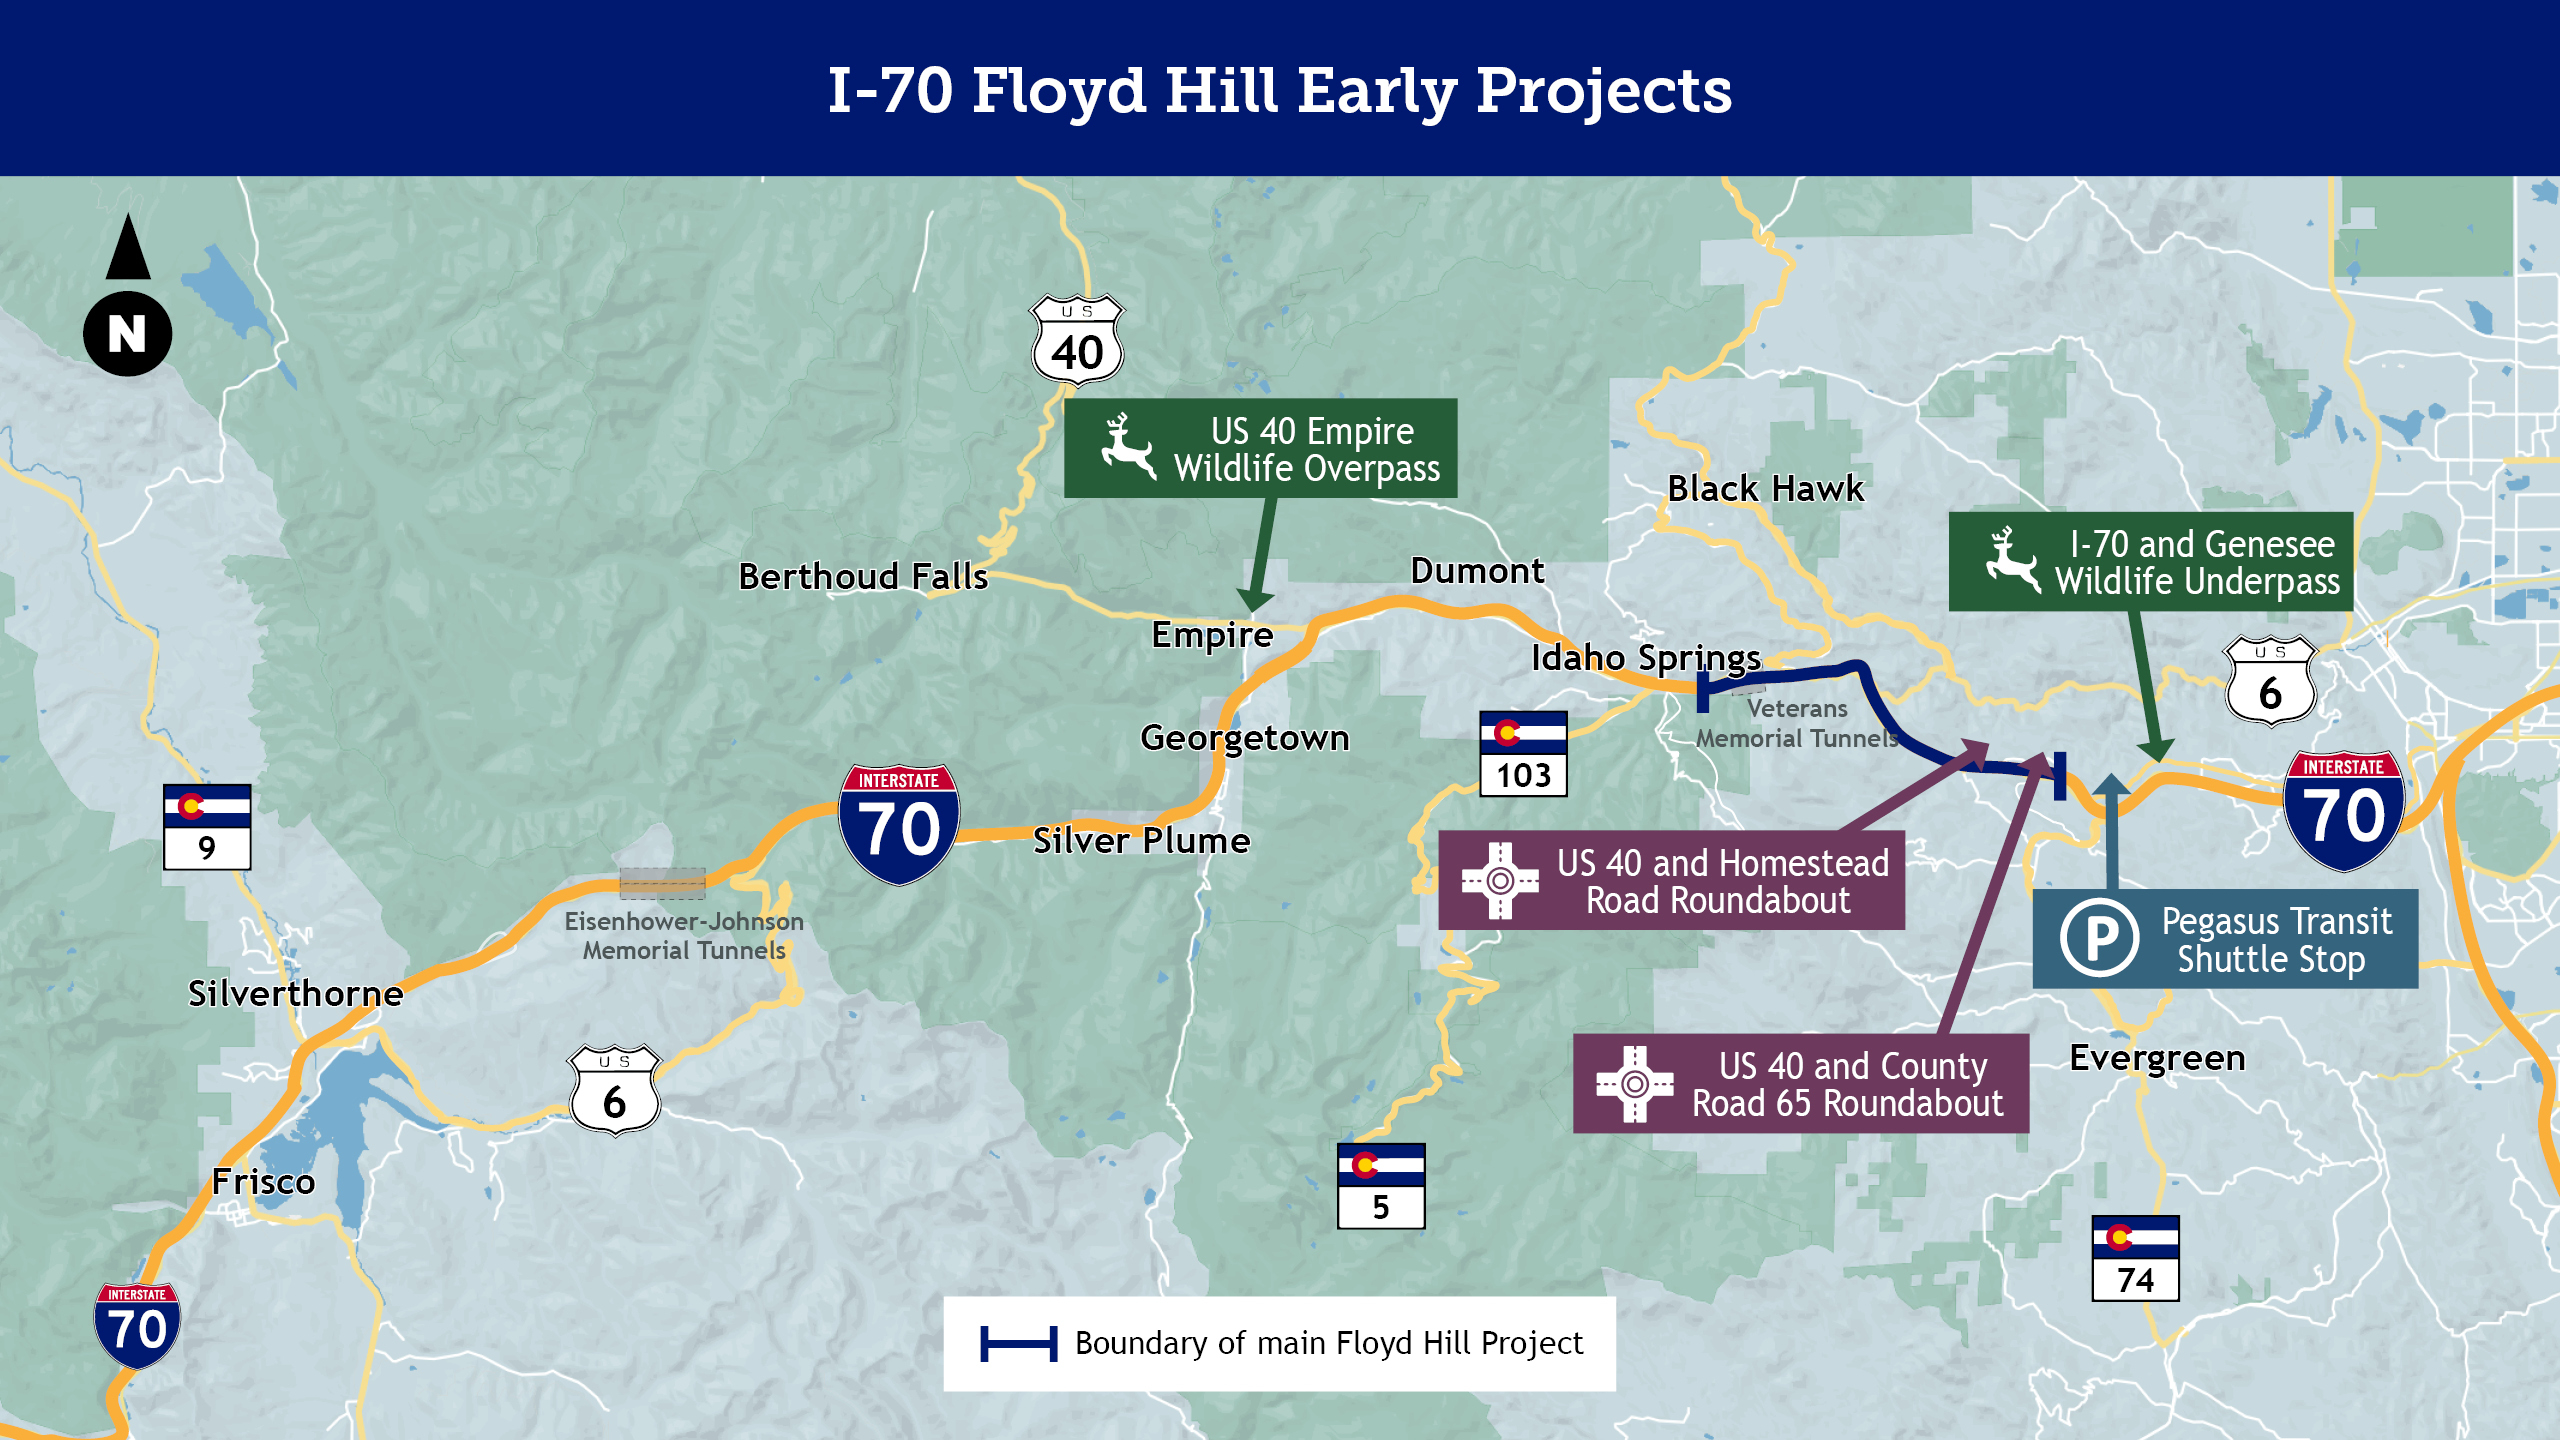 I-70 Floyd Hill Early Projects Map.jpg detail image